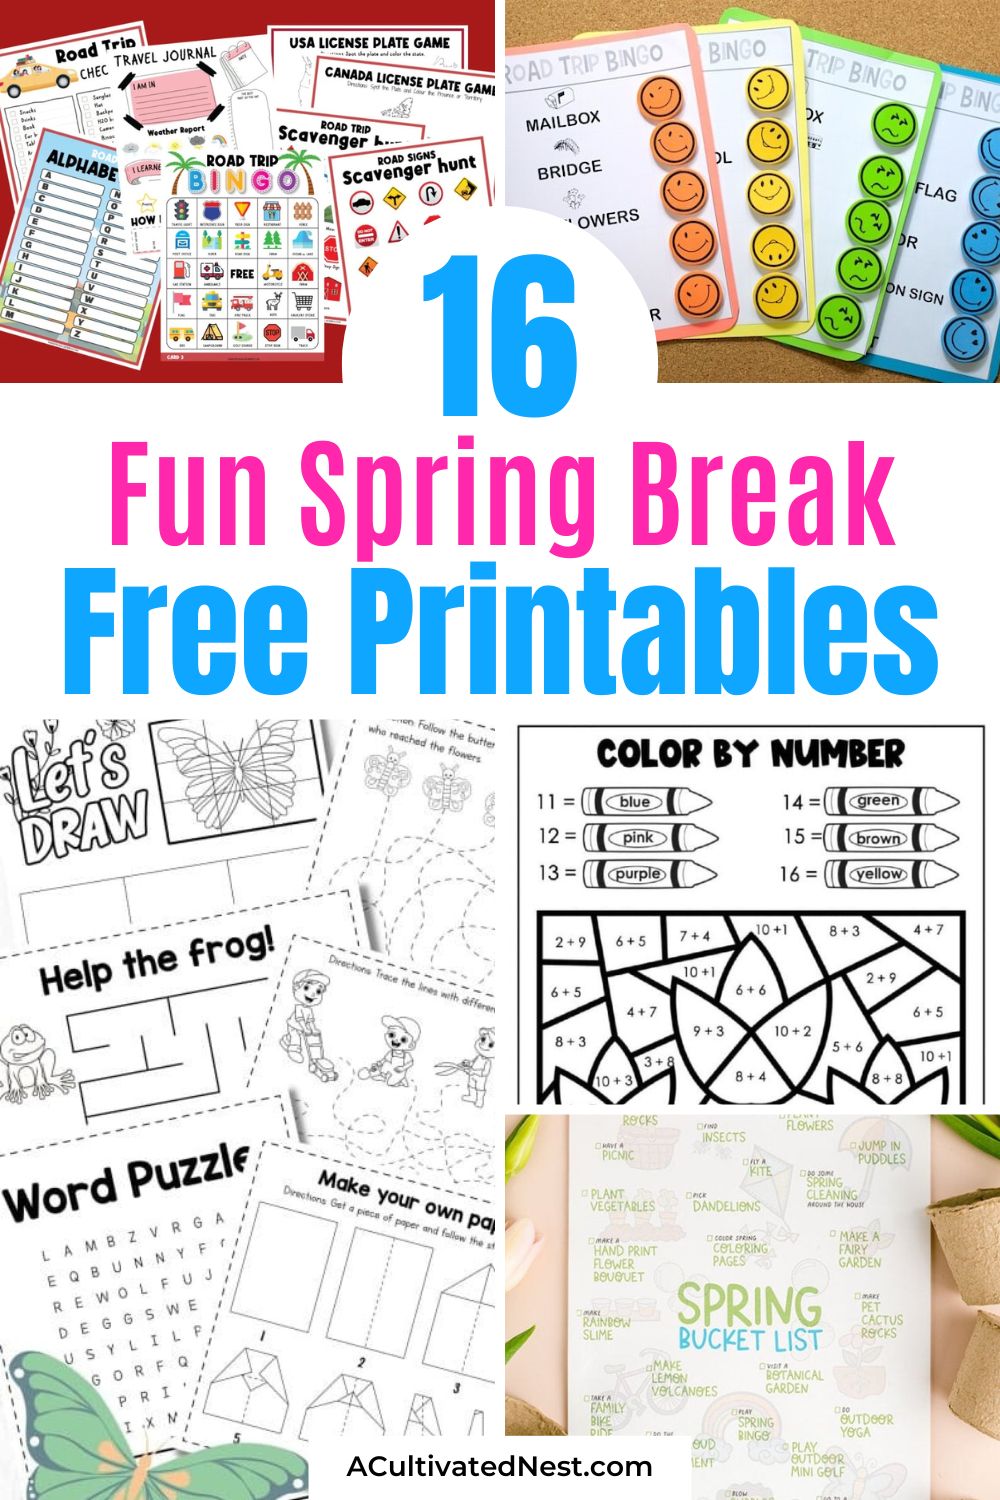 16 Fun Free Spring Break Printables- Ready to add some excitement to your Spring Break? Discover our fun free Spring Break printables for an epic family adventure! From crafting your own bucket list to capturing memories in a special journal and turning long drives into a game, these printables are your key to a fun-filled vacation. | #TravelWithKids #SpringBreakIdeas #ActivitySheets #FreePrintables #ACultivatedNest